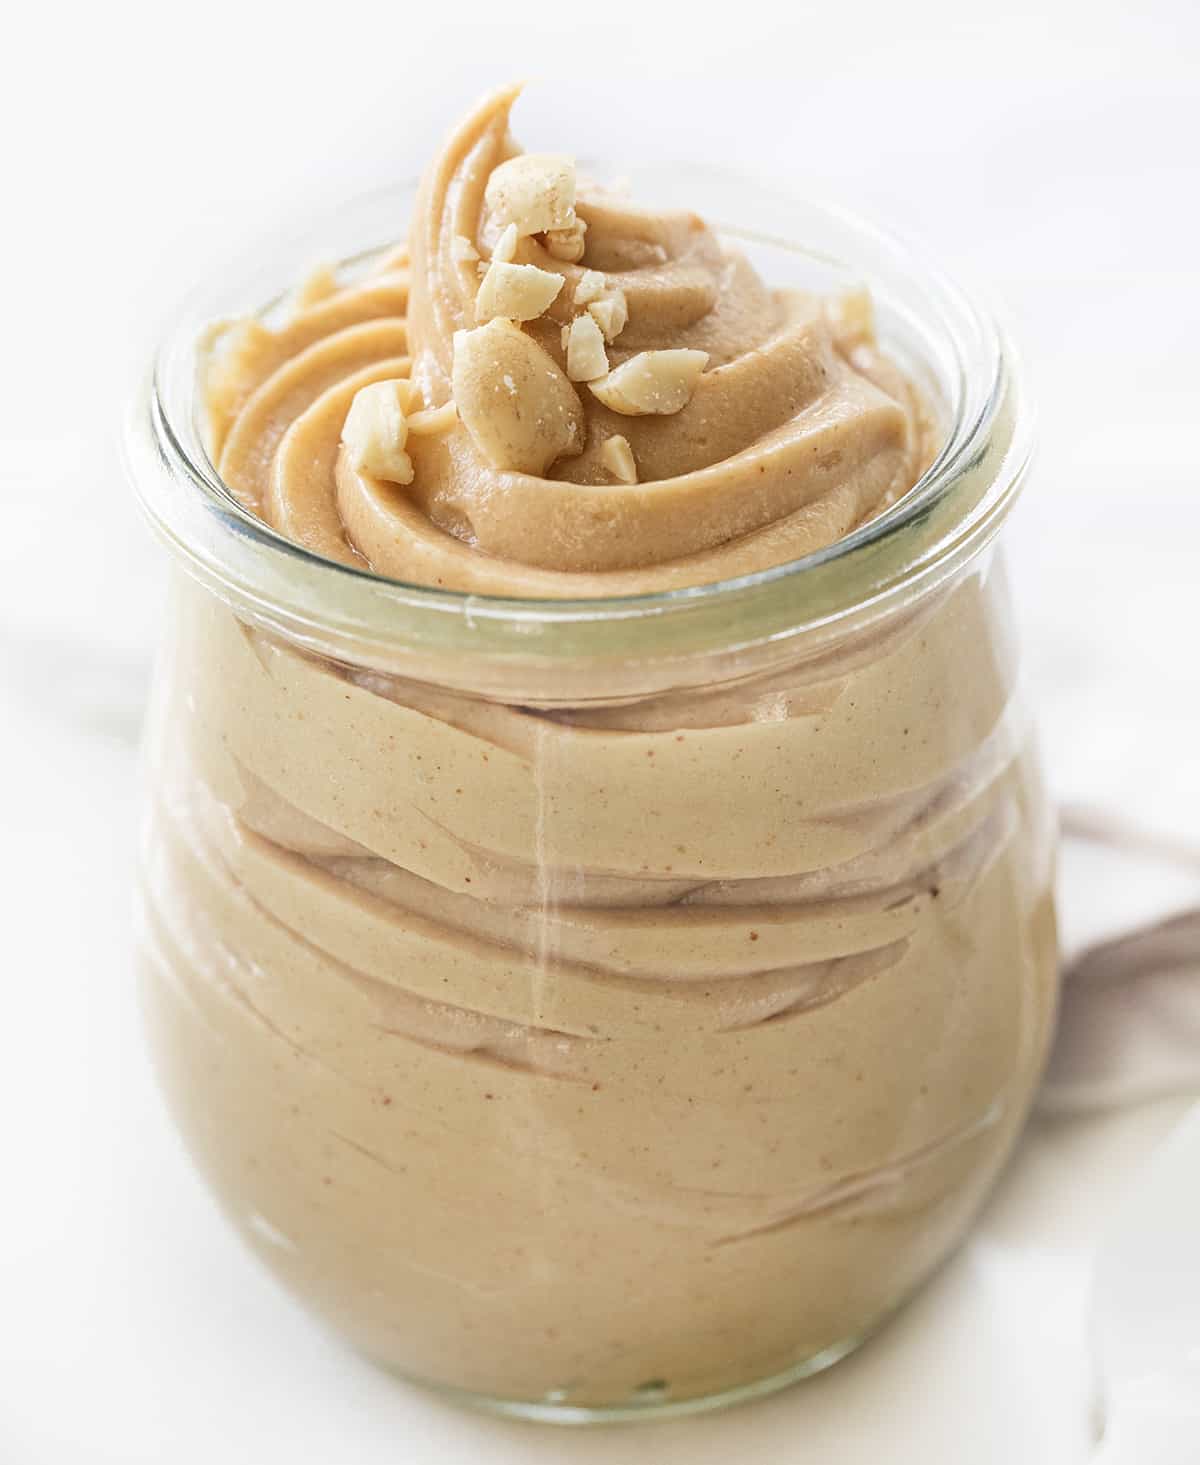 Container of Peanut Butter Mousse Swirled Inside a Jar on a White Counter.